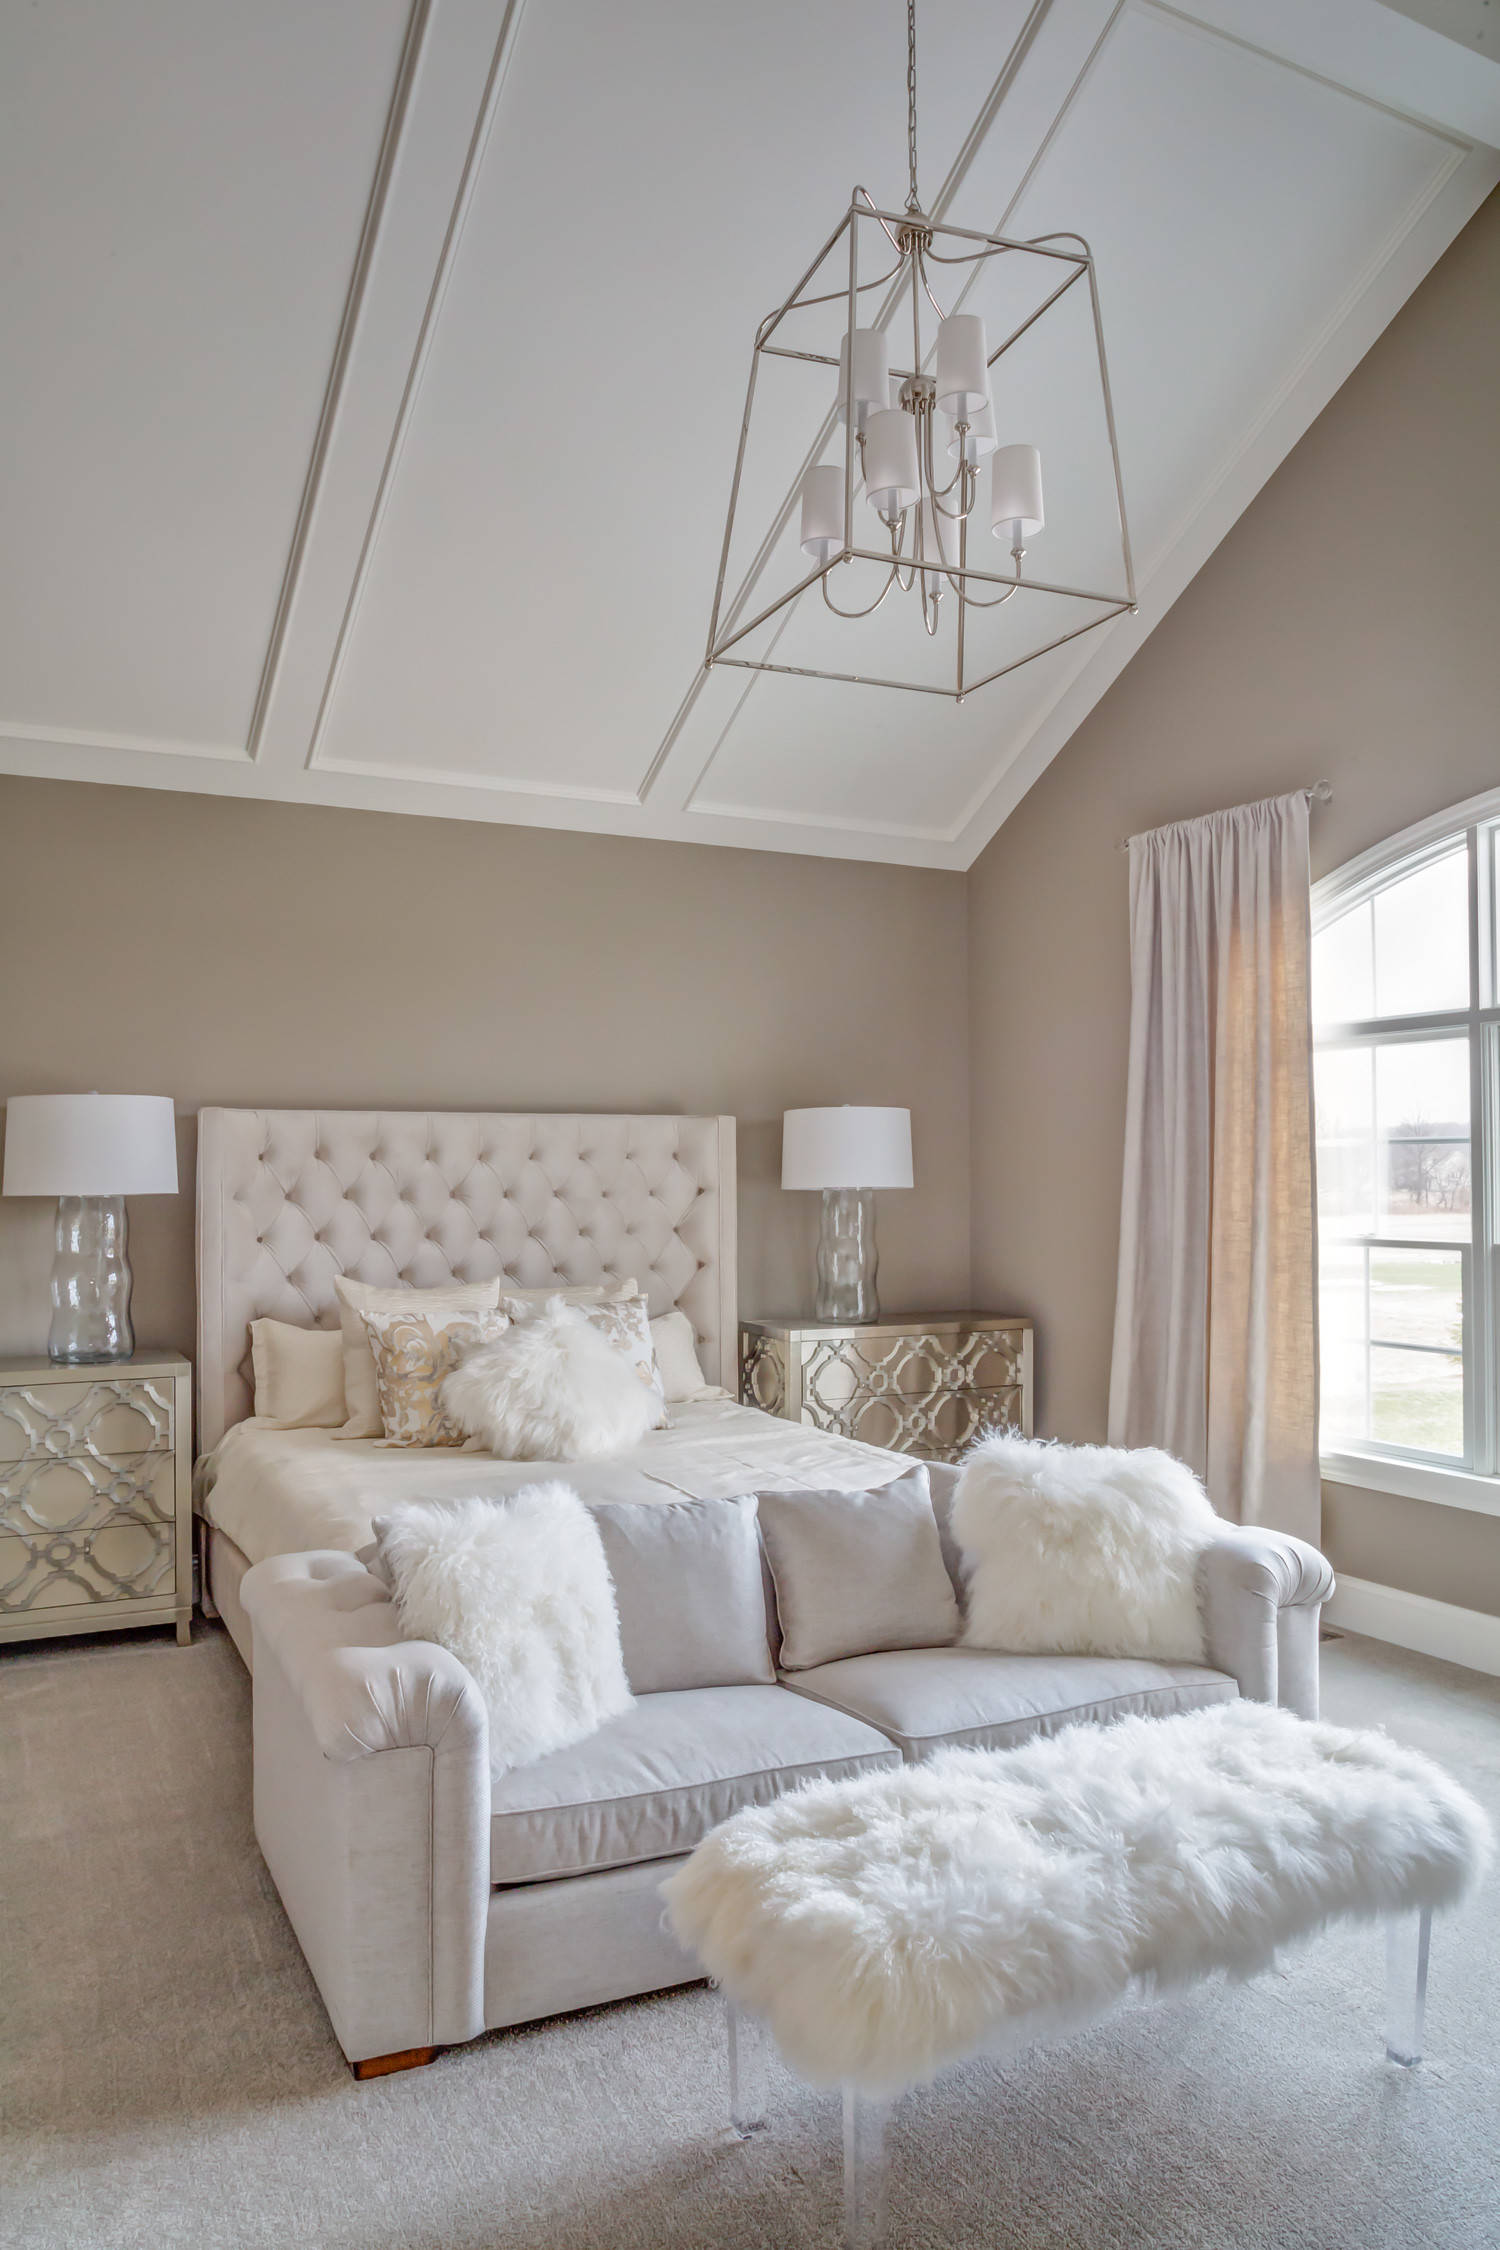 75 White Bedroom Ideas You'll Love - April, 2023 | Houzz